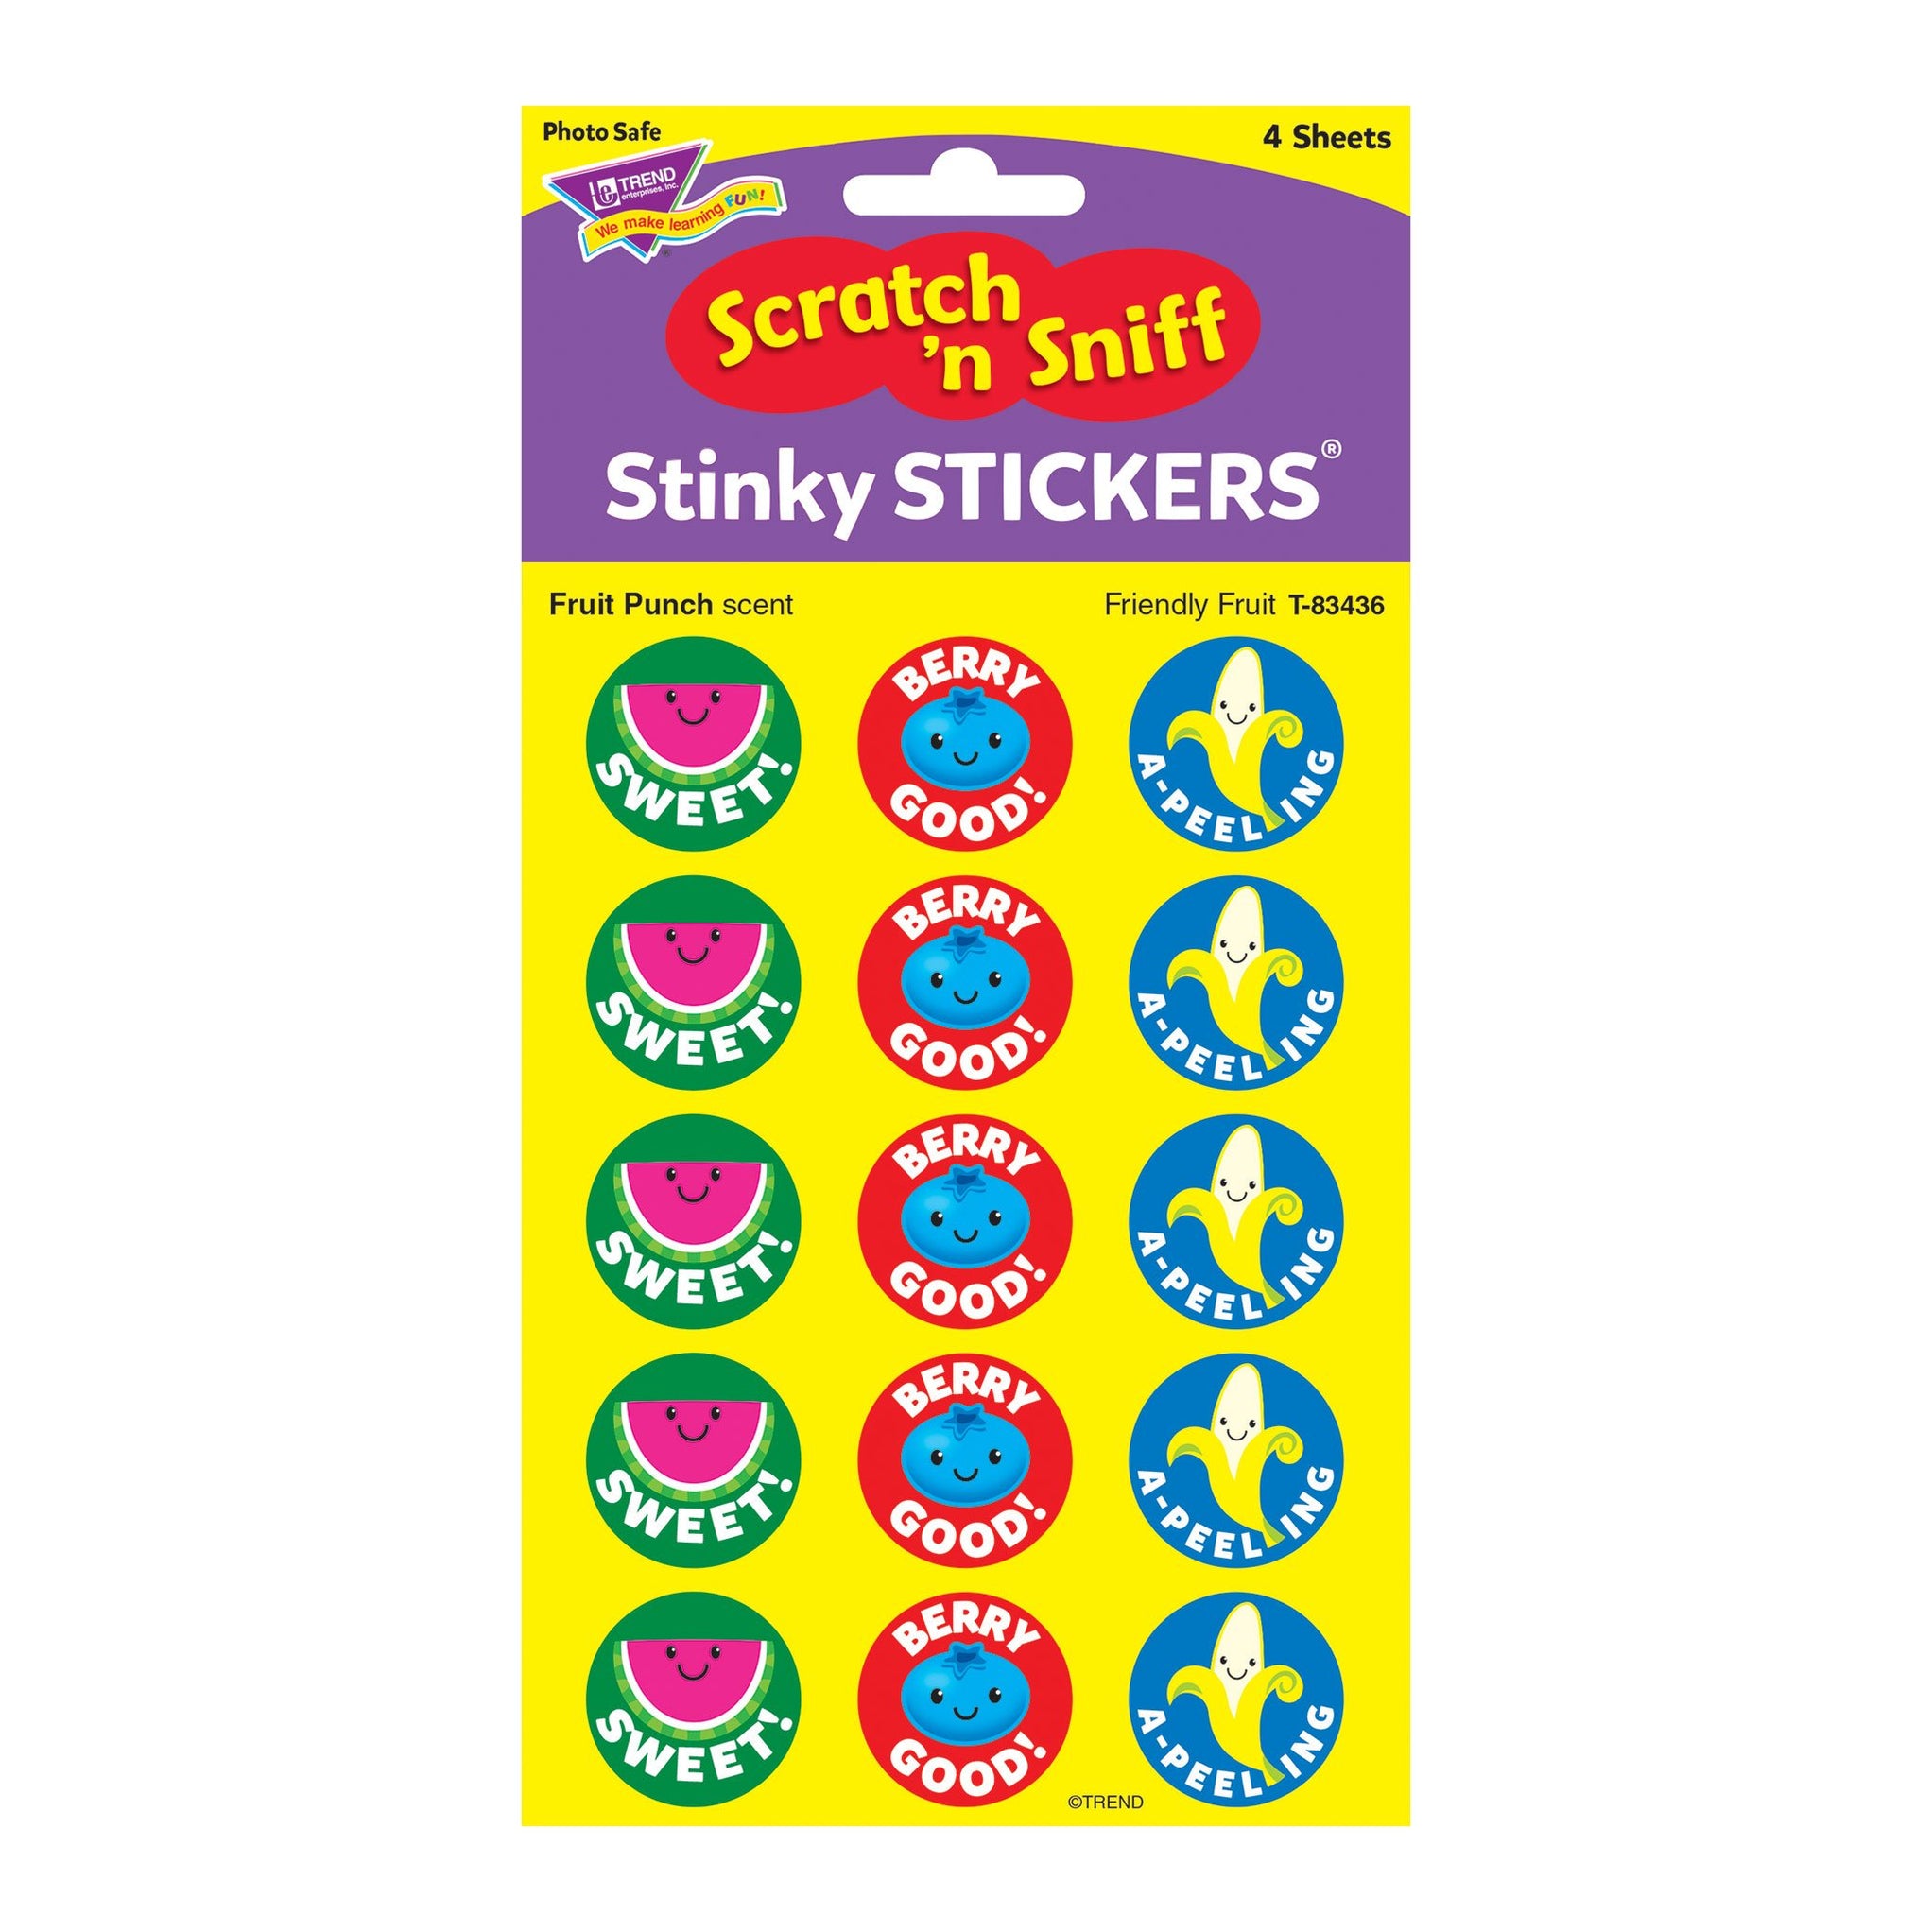 Scratch Sniff Stinky Stickers Friendly Fruit Fruit Punch Scent T83436 4430